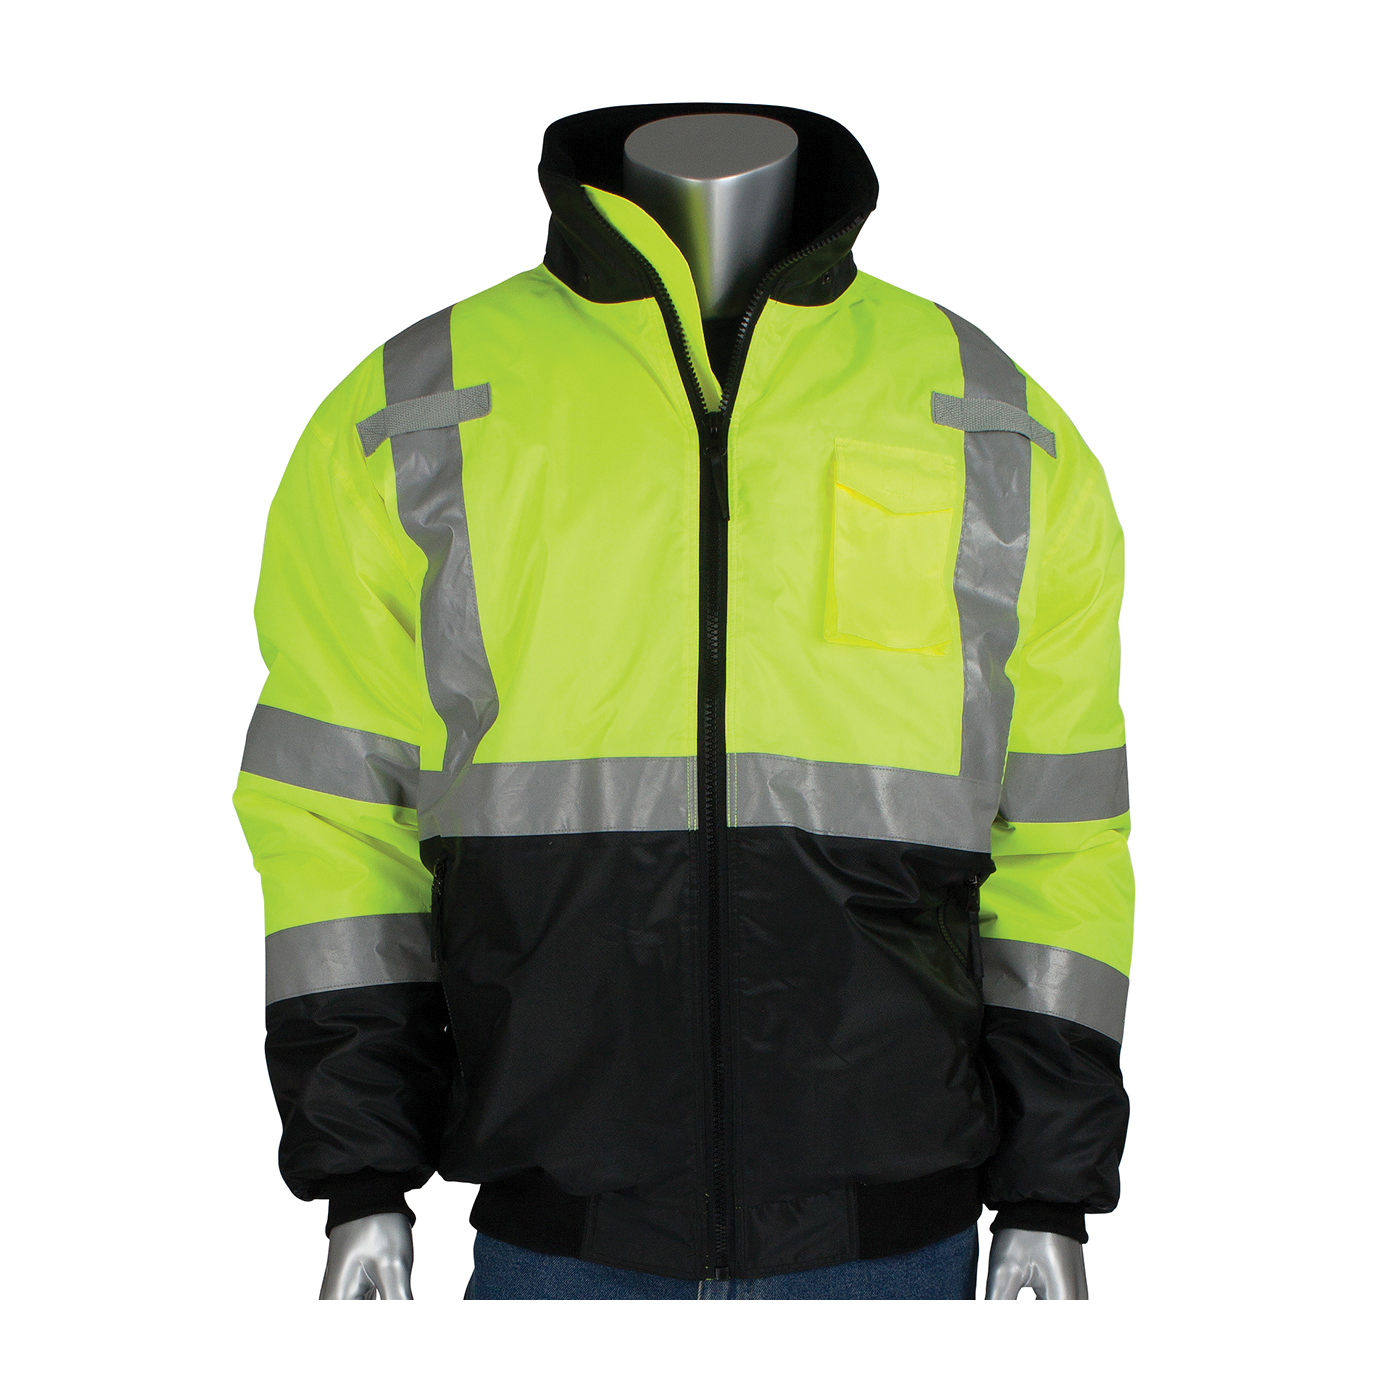 PIP® 333-1740-LY/XL Bomber Jacket, Black/Hi-Viz Lime Yellow, Polyester, 59 in Chest, Resists: Water, ANSI Type R Class 3